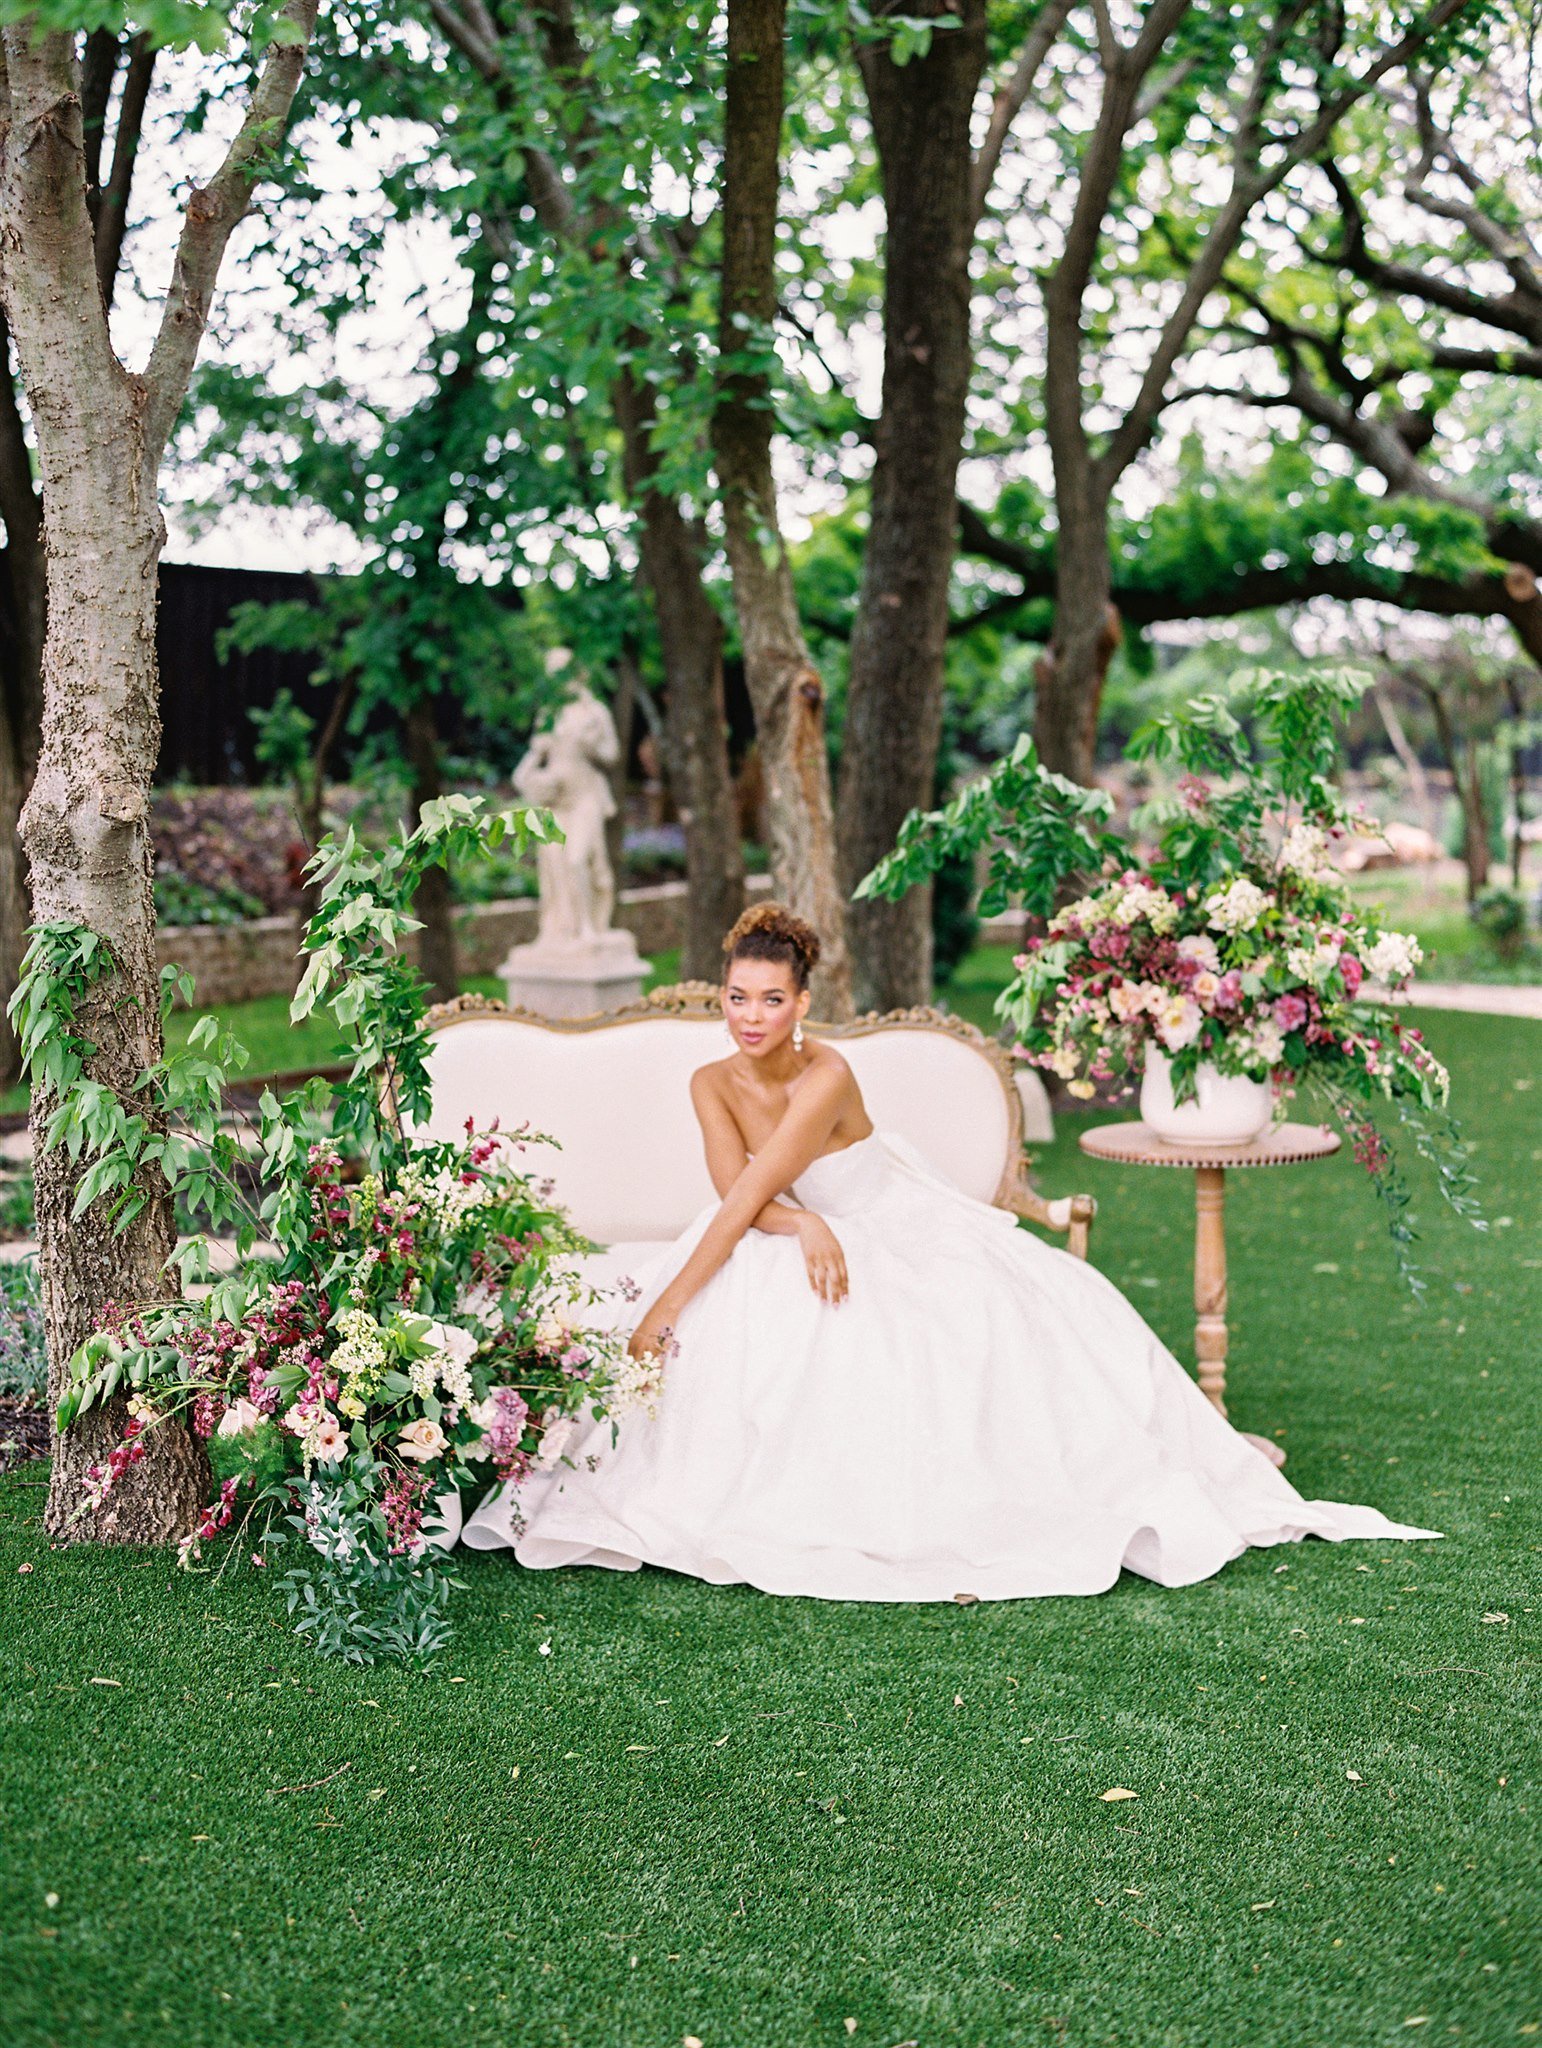 A bride sits outside on an upholstered couch, surrounded by flowers, her arms crossed over her lap